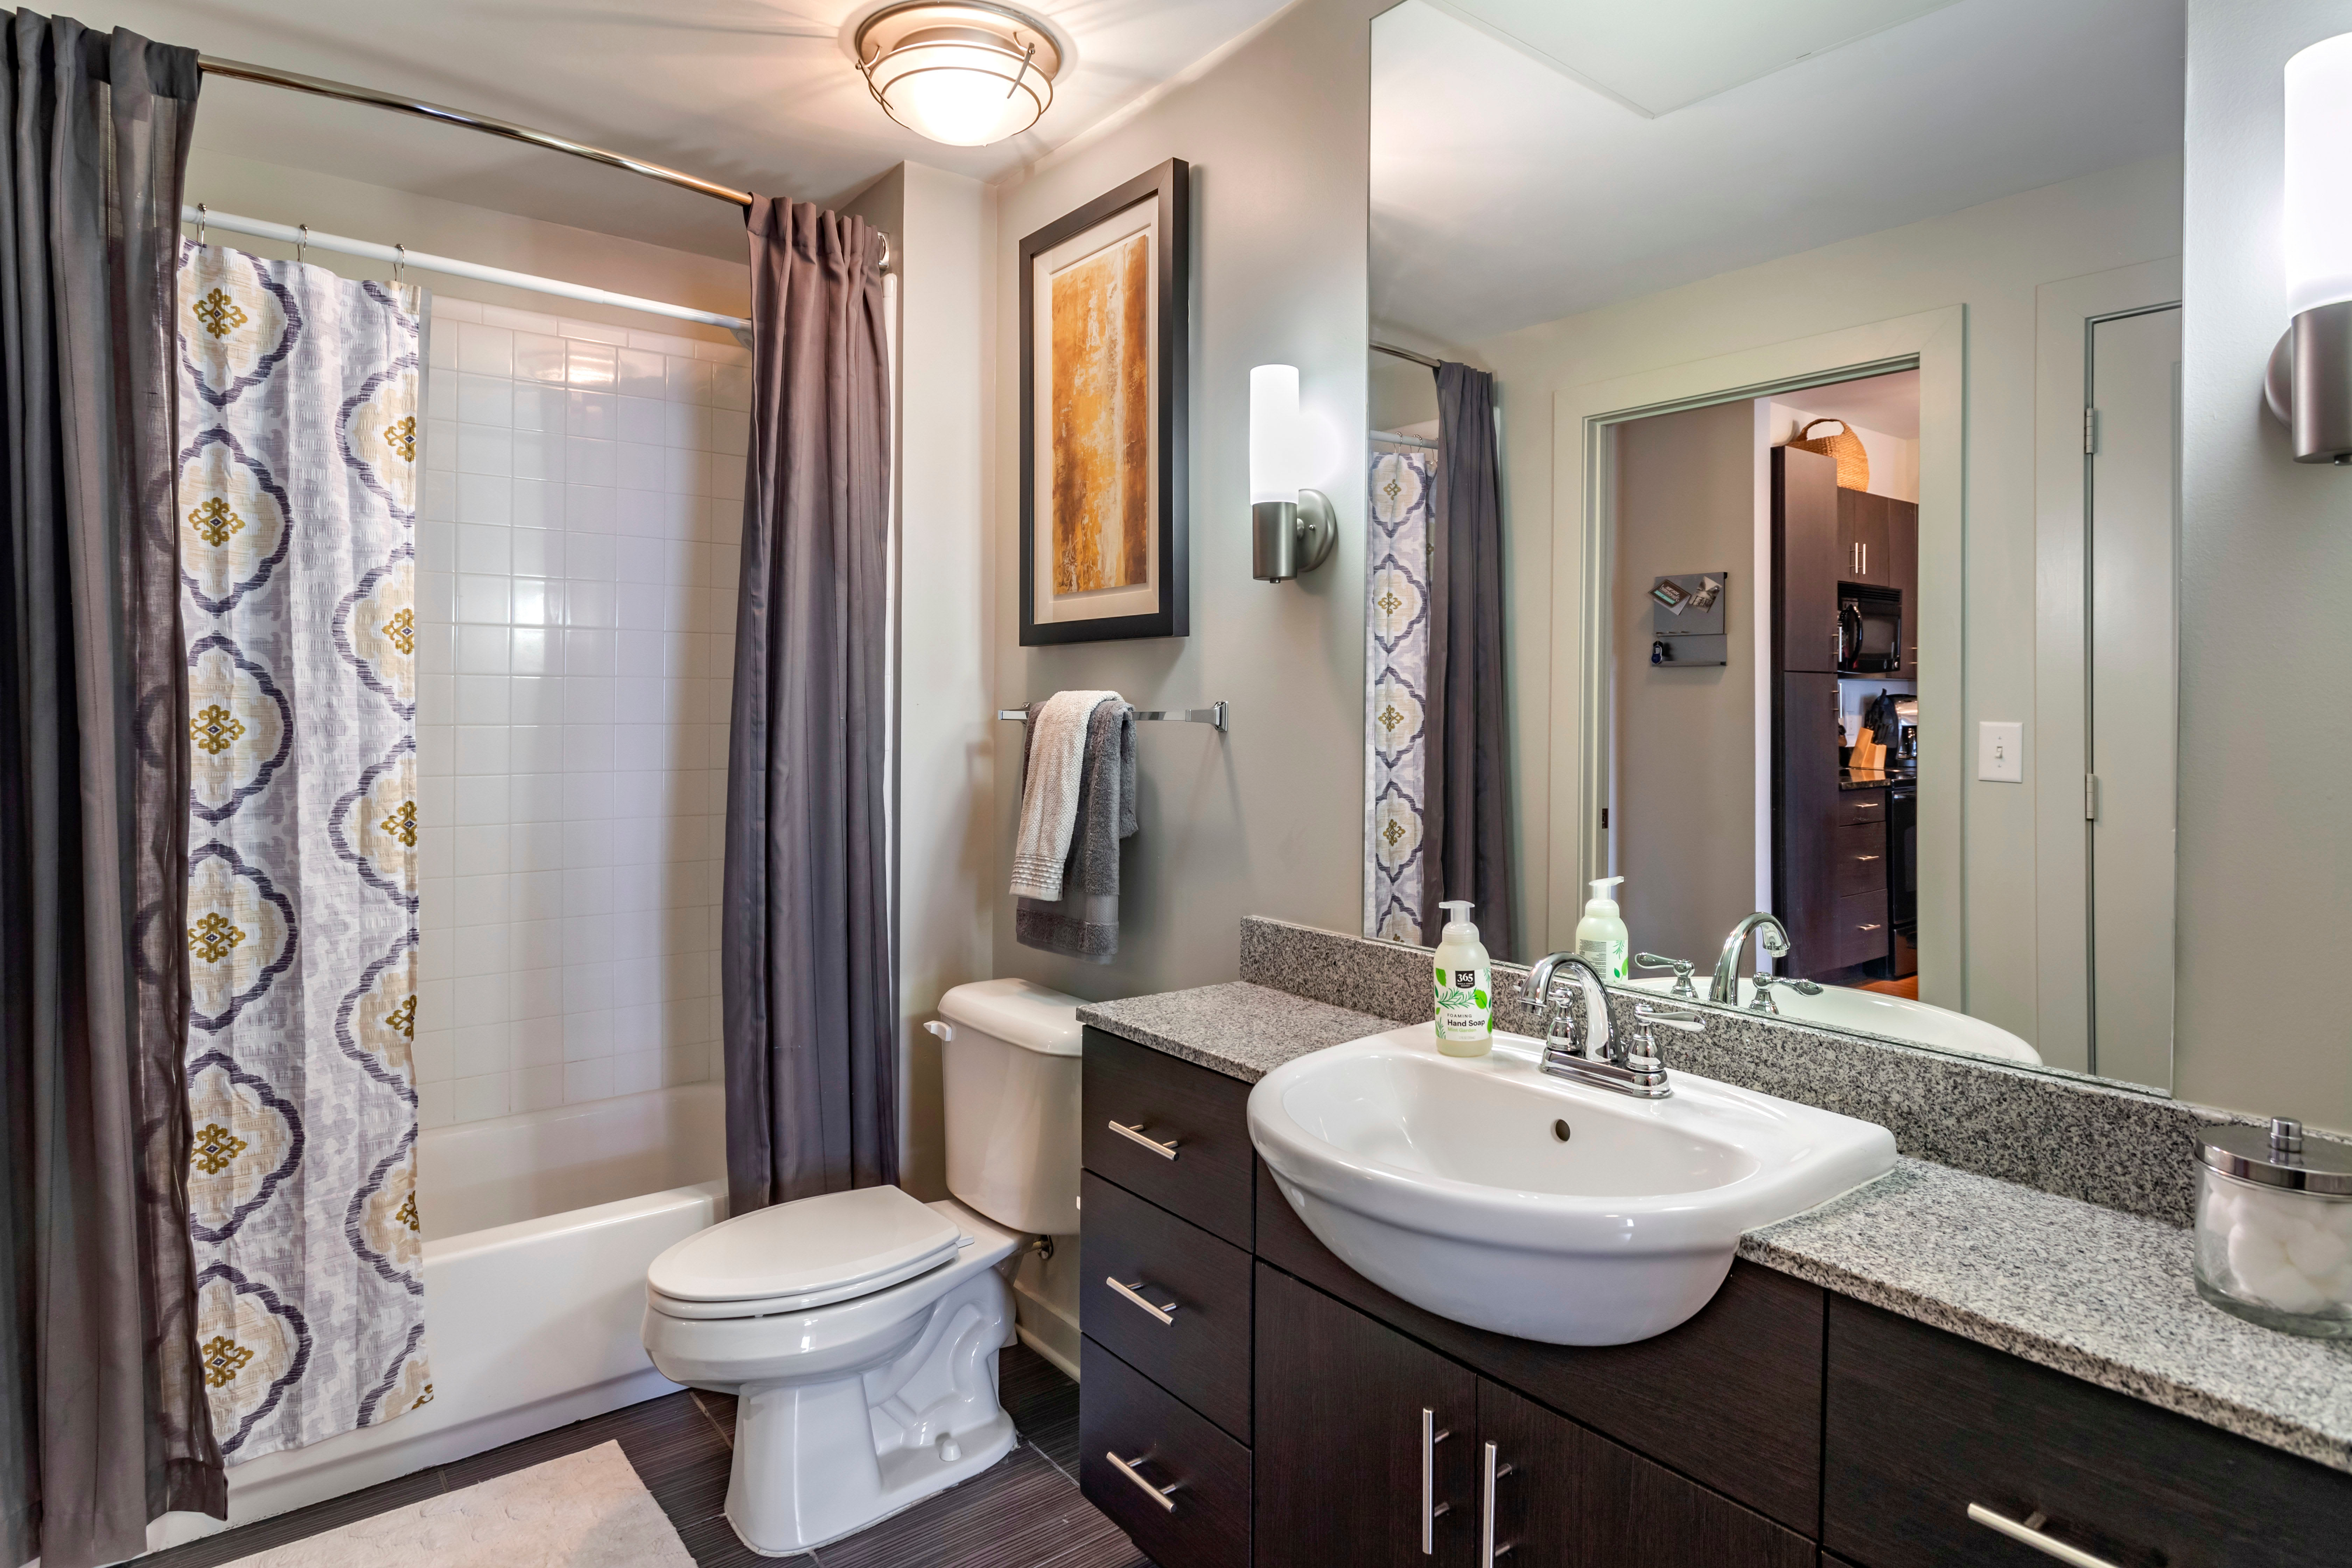 Extra storage in a model home's master bathroom at Olympus Midtown in Nashville, Tennessee